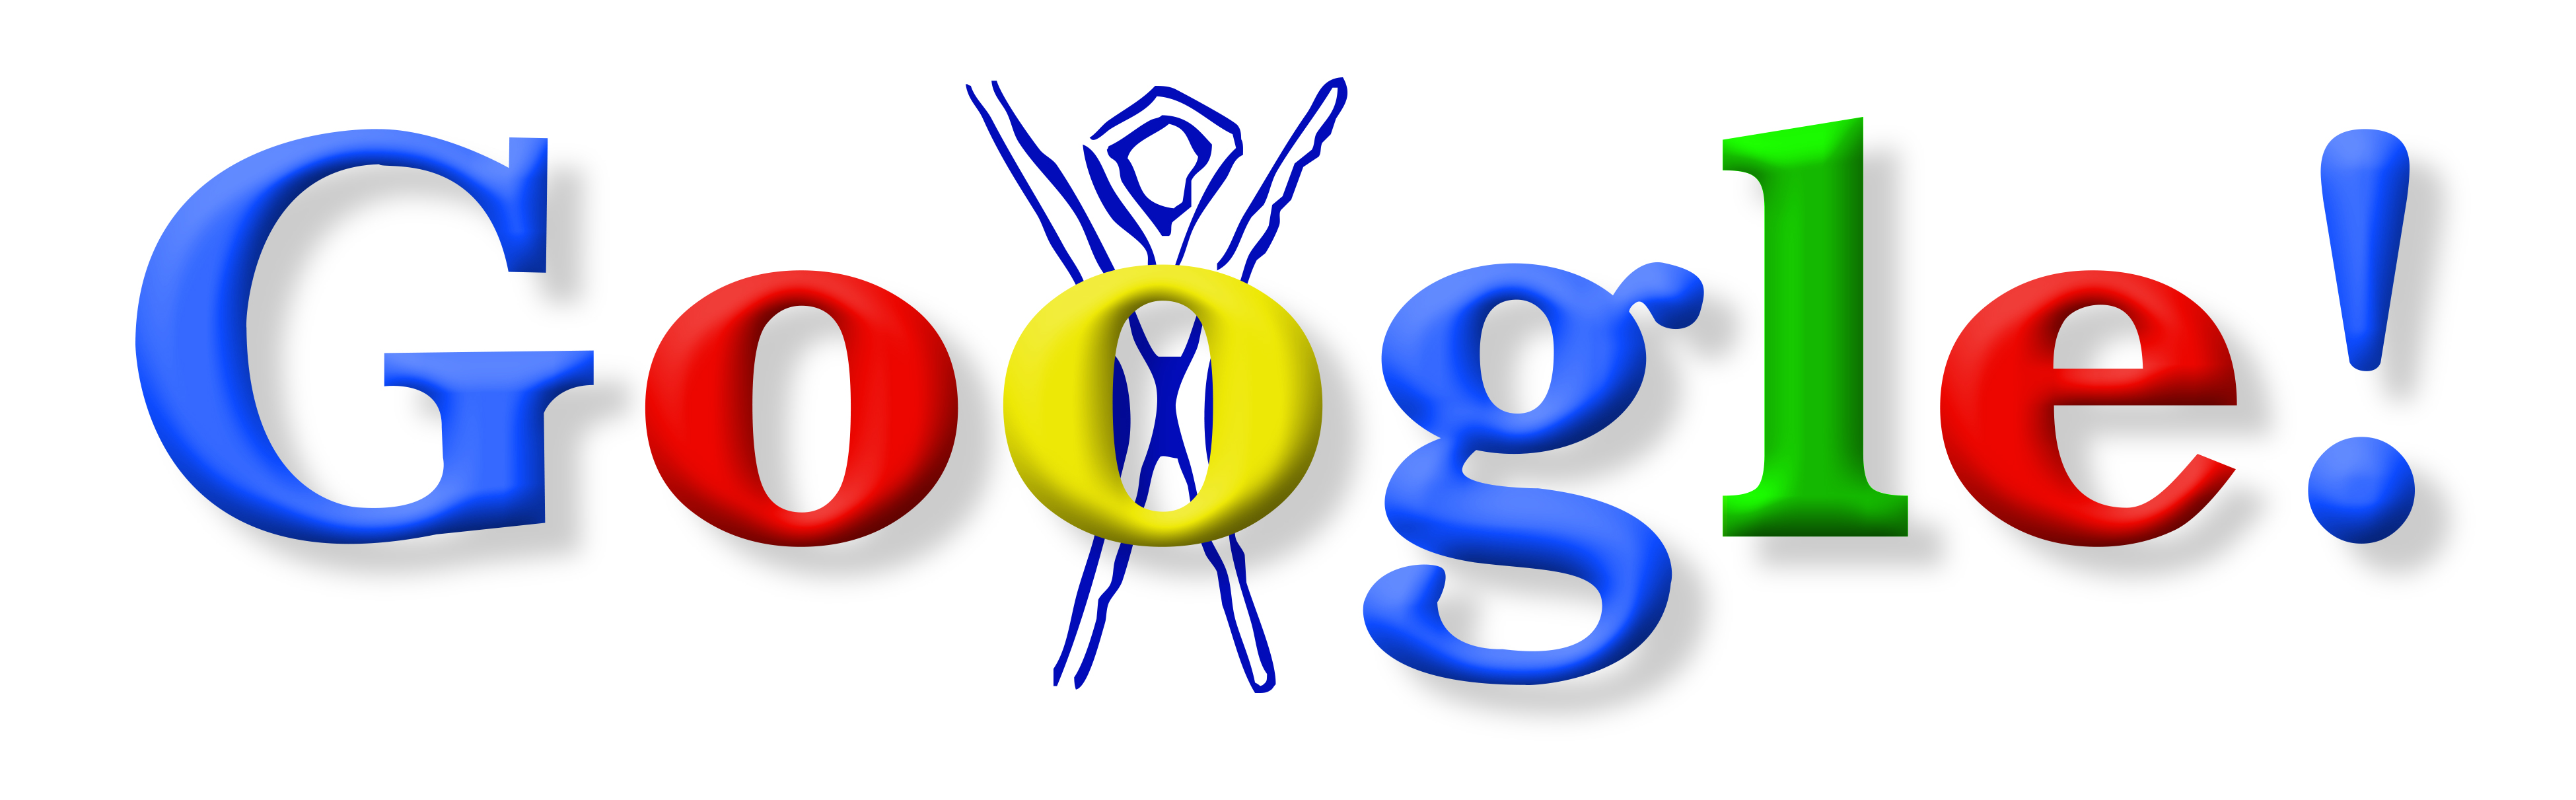 What was the 1st Google Doodle game?